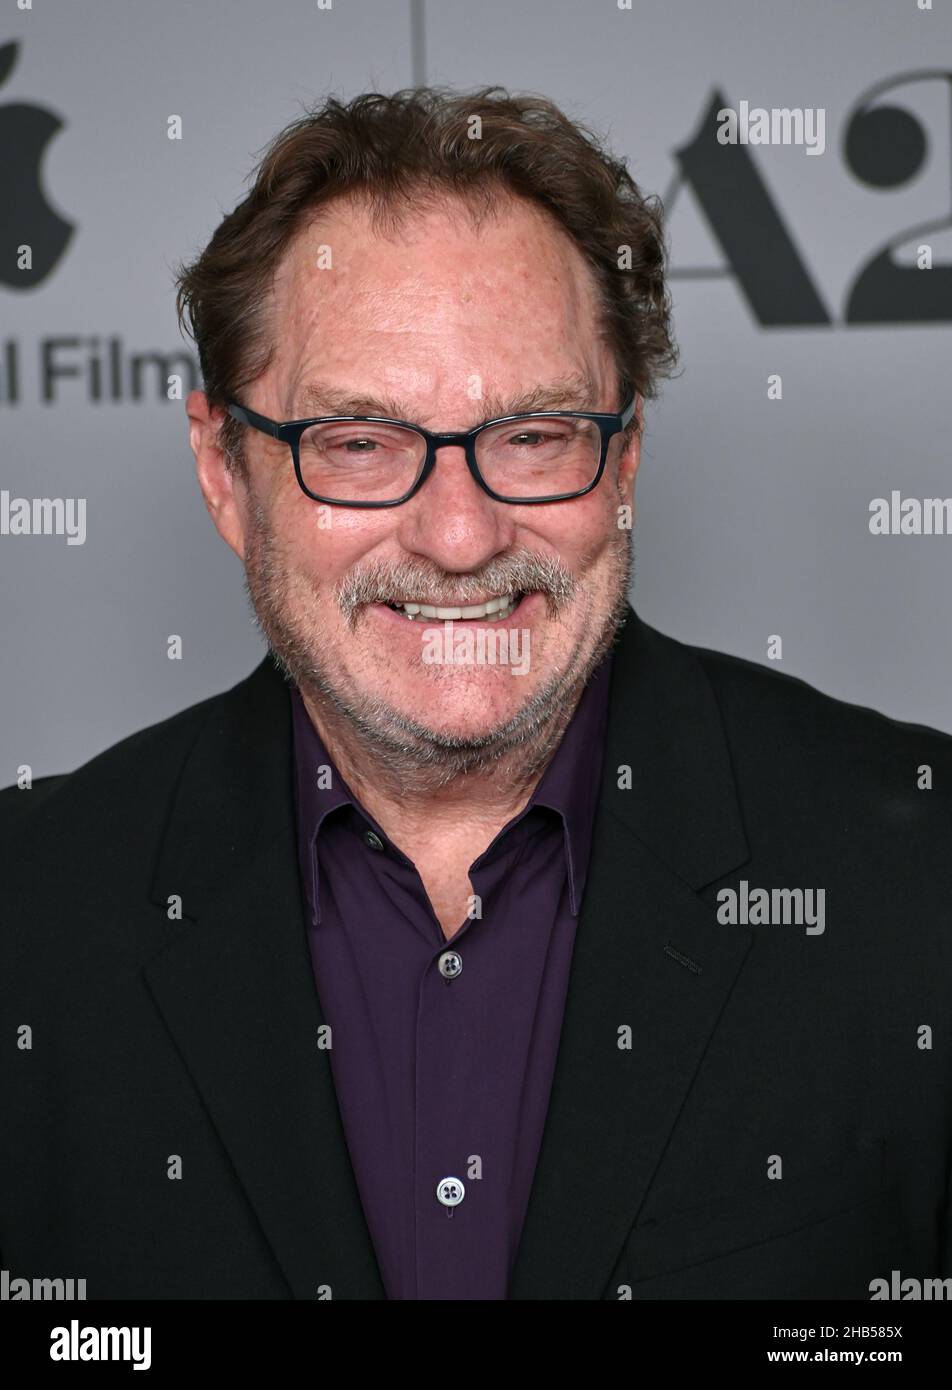 Los Angeles, USA. 16th Dec, 2021. LOS ANGELES, USA. December 16, 2021: Stephen Root at the premiere of 'The Tragedy of Macbeth' at the Directors Guild of America Theatre. Picture Credit: Paul Smith/Alamy Live News Stock Photo